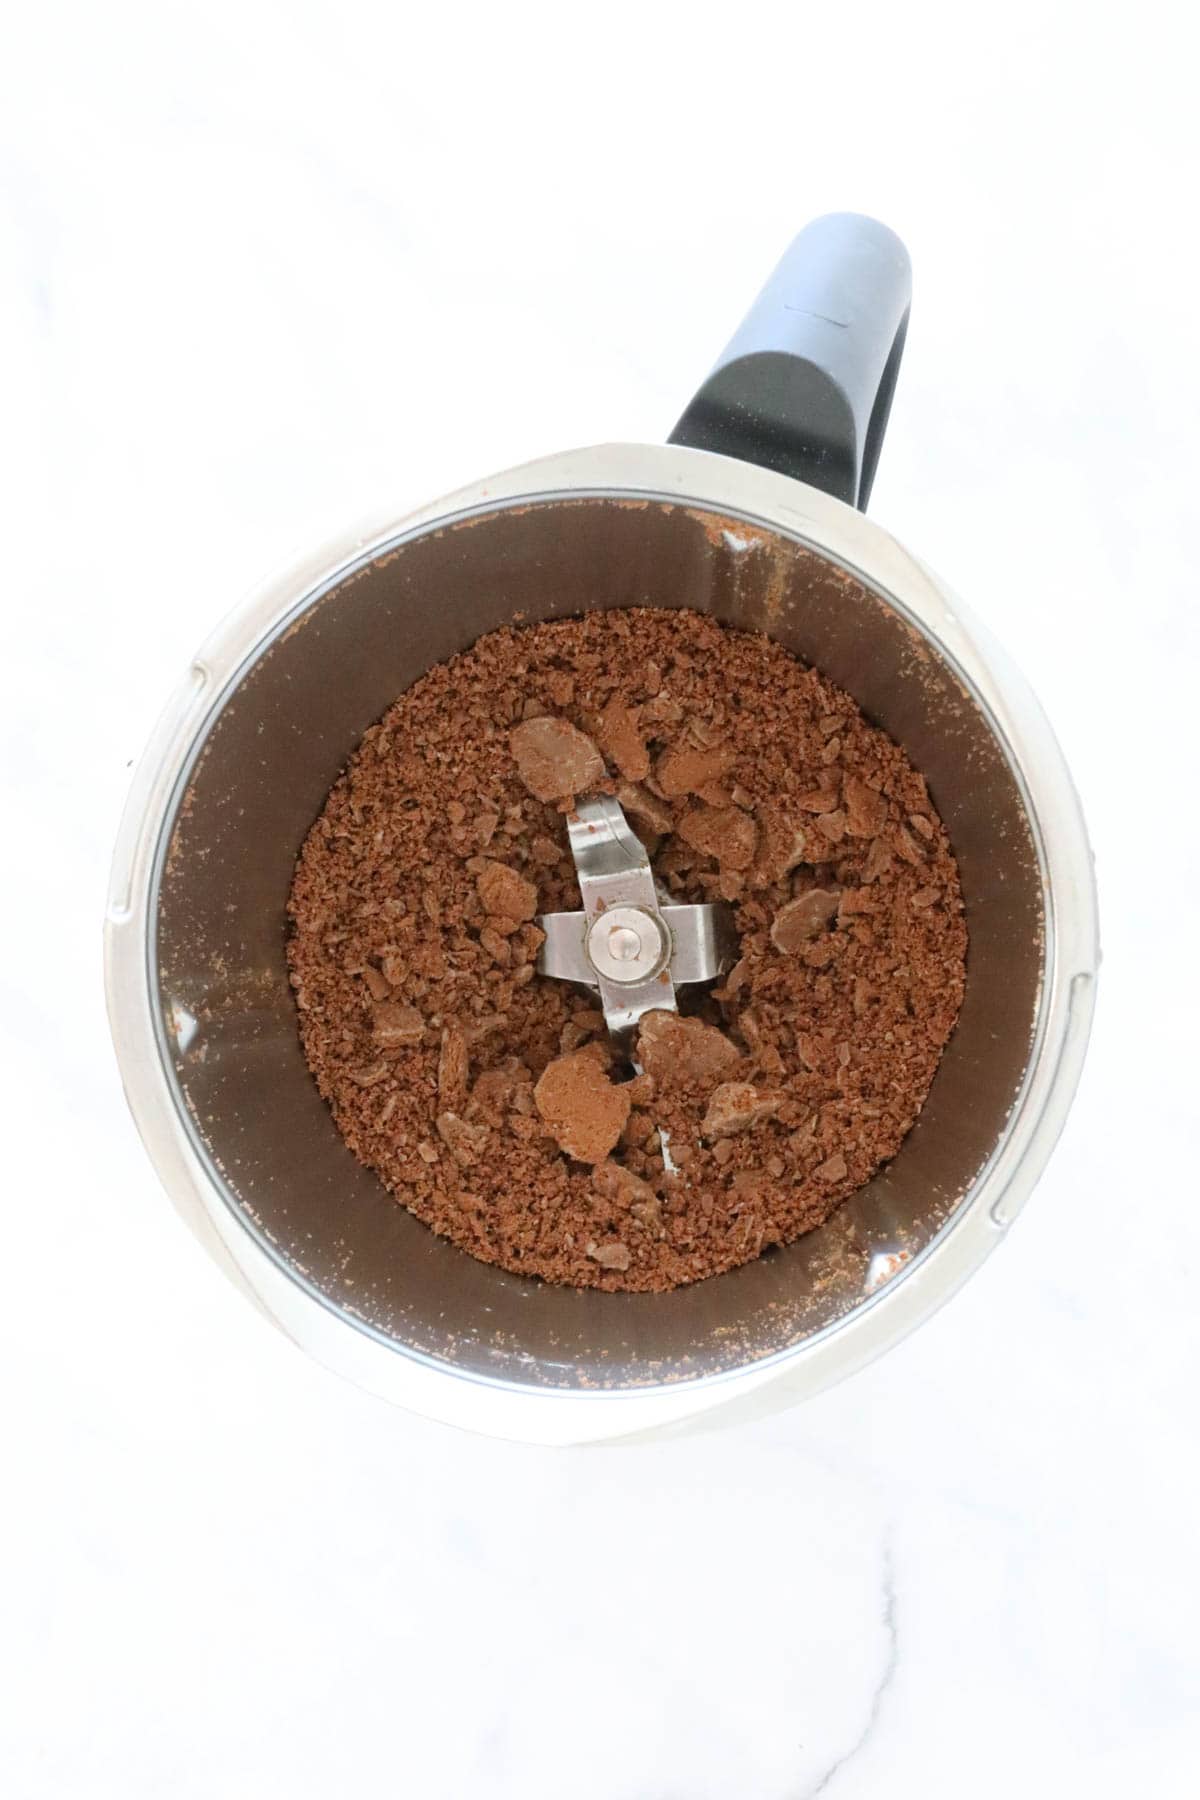 Crushed Tim Tams in a Thermomix.